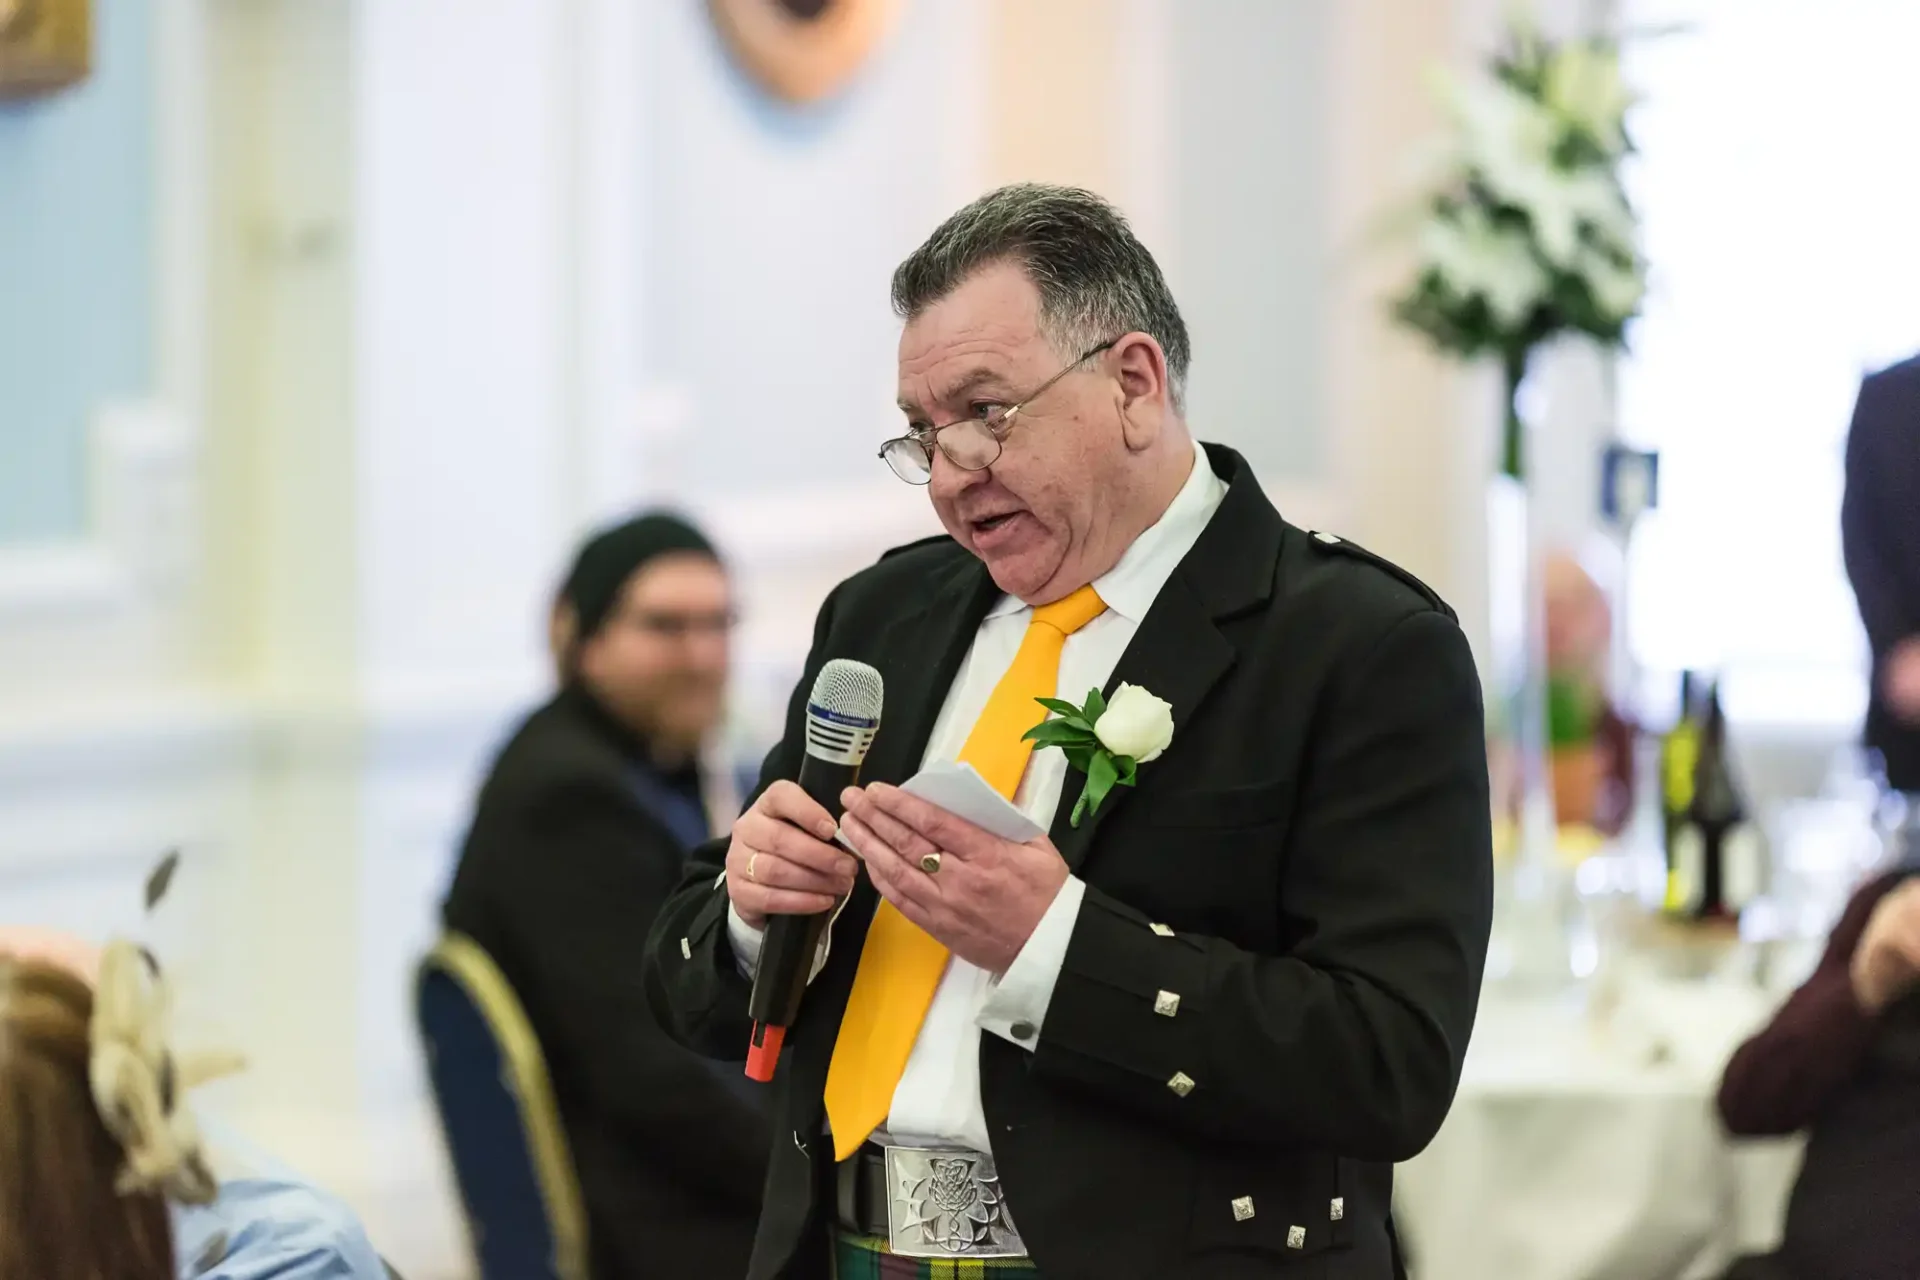 Man in black suit and yellow tie speaking into a microphone at a formal event, reading from a card, with blurred background.